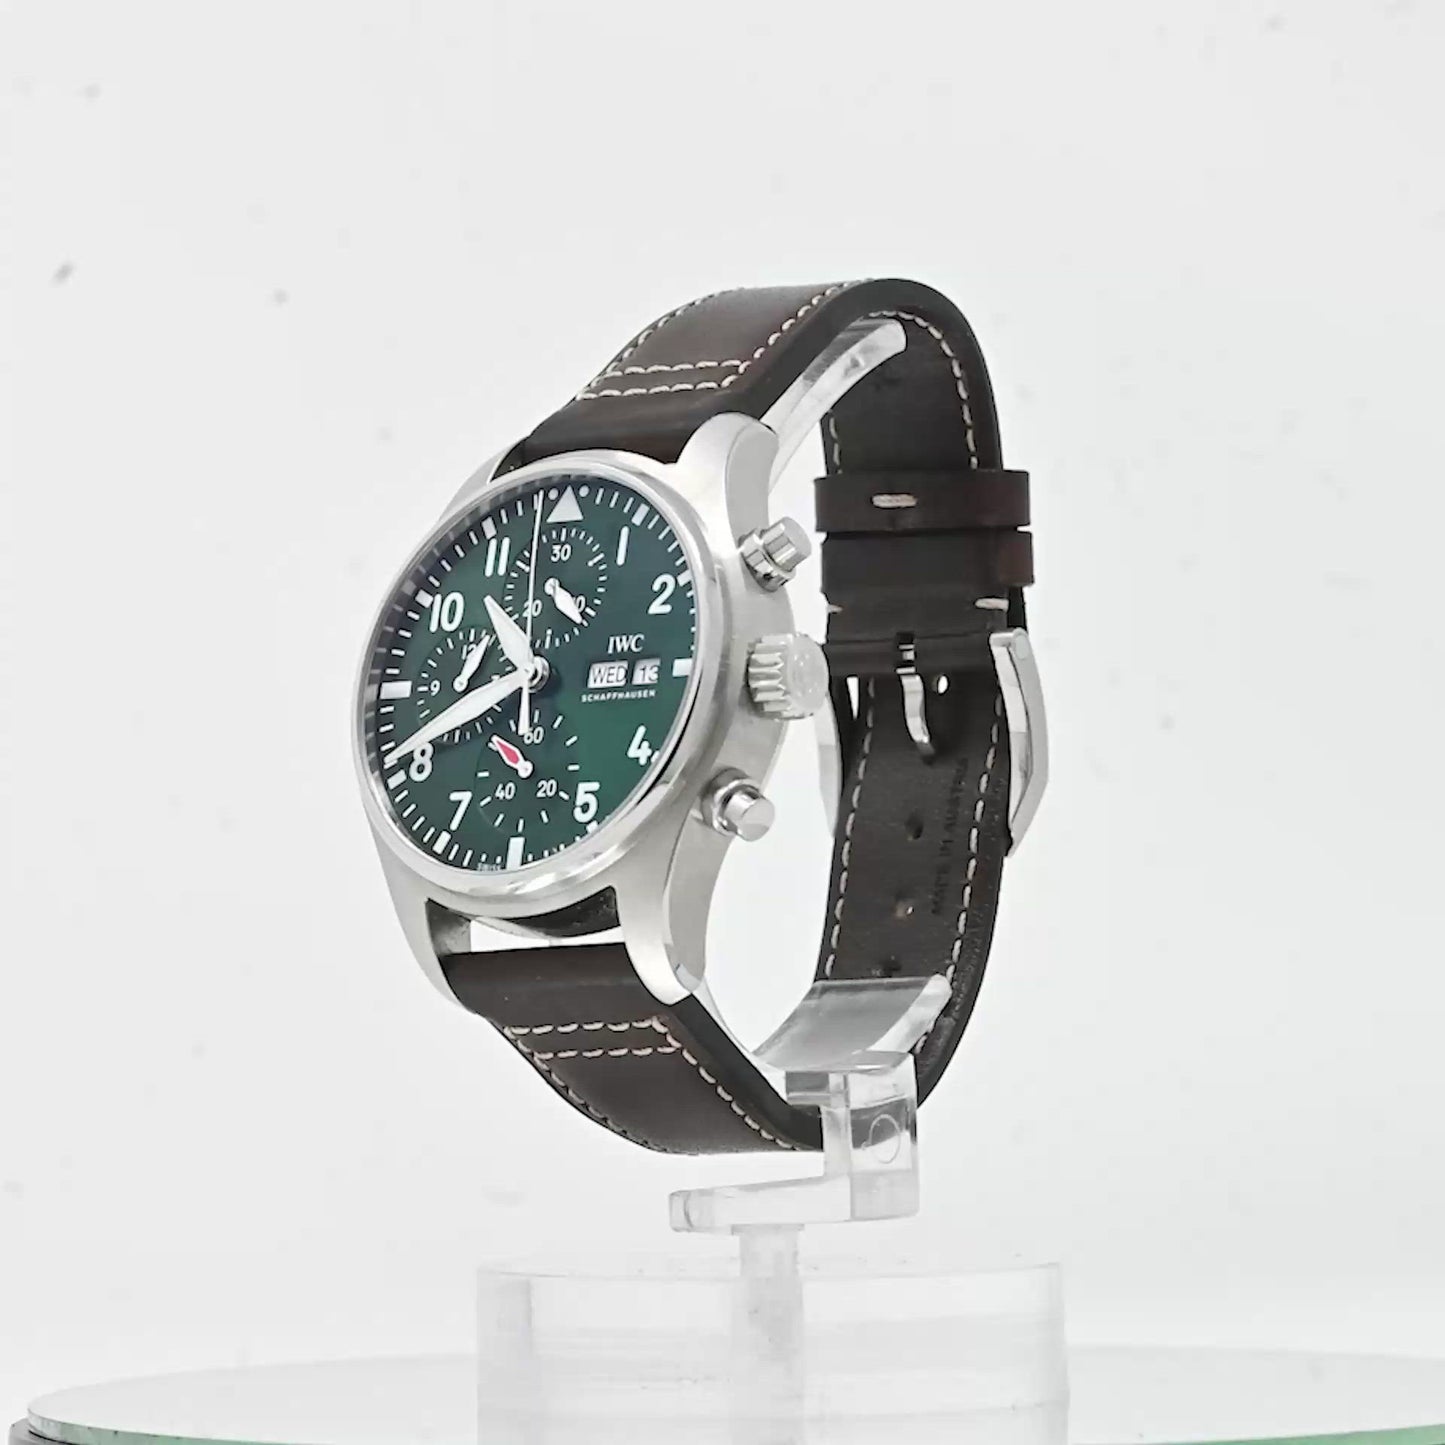 IWC Men's Pilot's Watch Stainless Steel 41mm Green Chronograph Dial Watch Reference #: IW388103